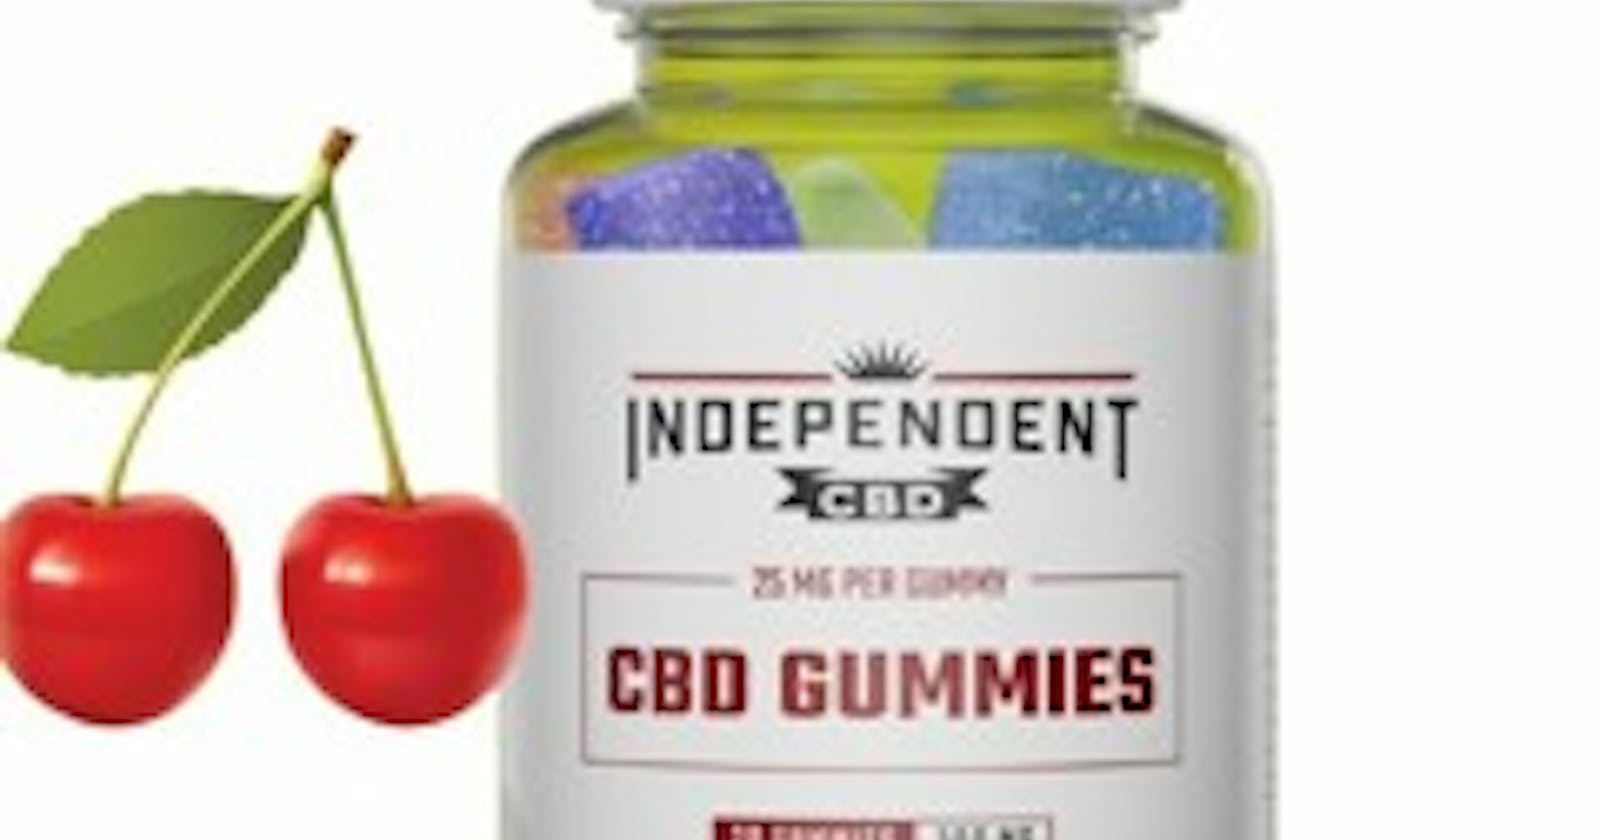 Independent CBD Gummies Review: Benefits How Do They Work?